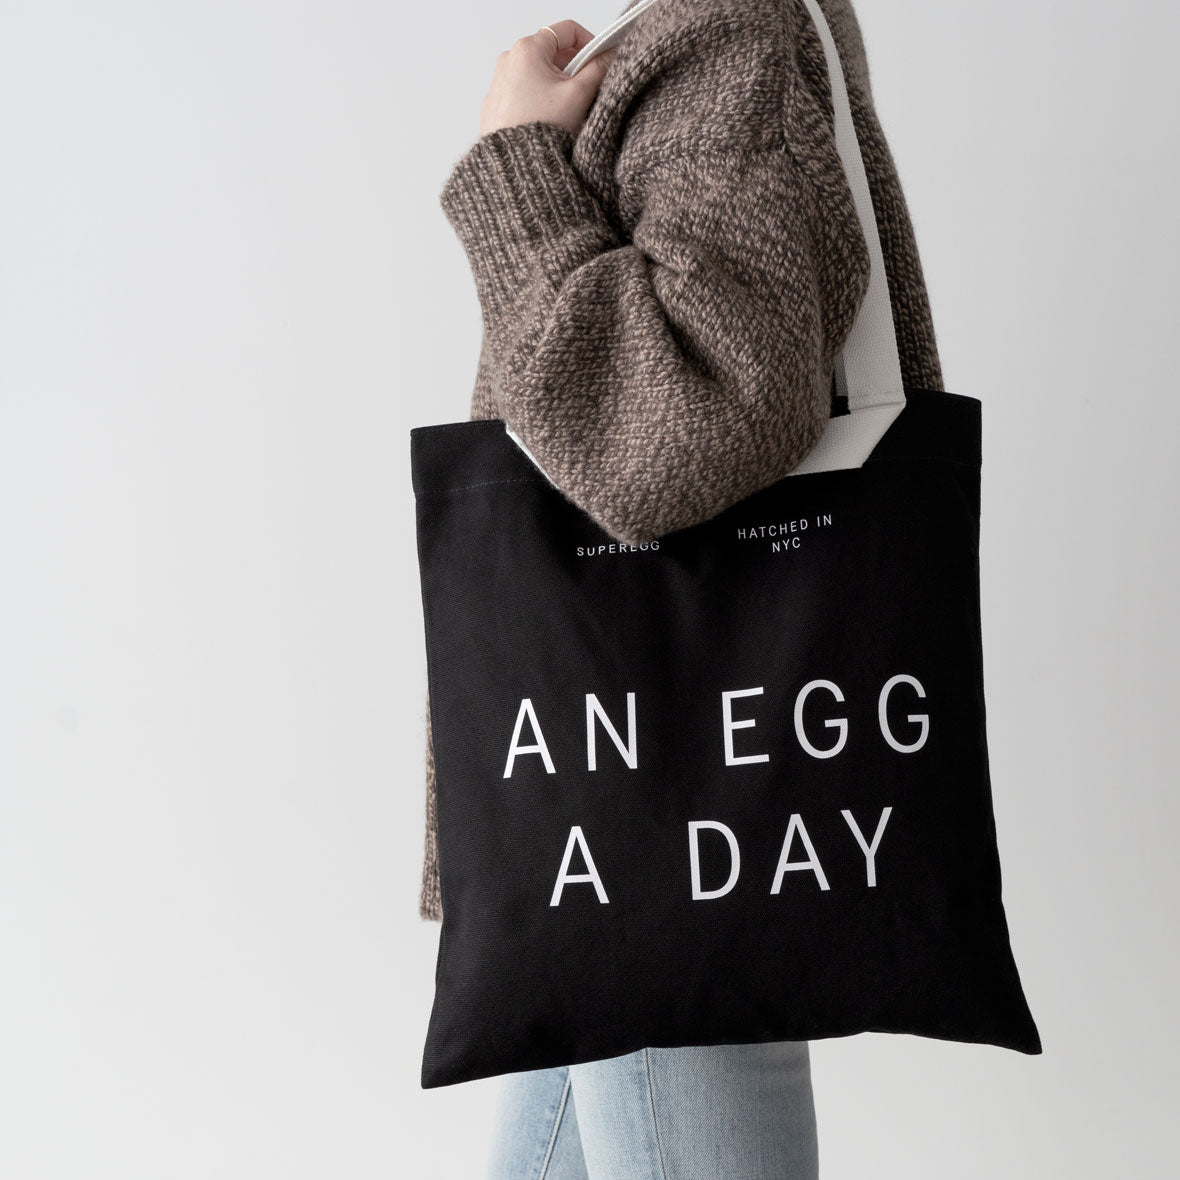 Superegg clean beauty vegan skincare Tote An egg a day